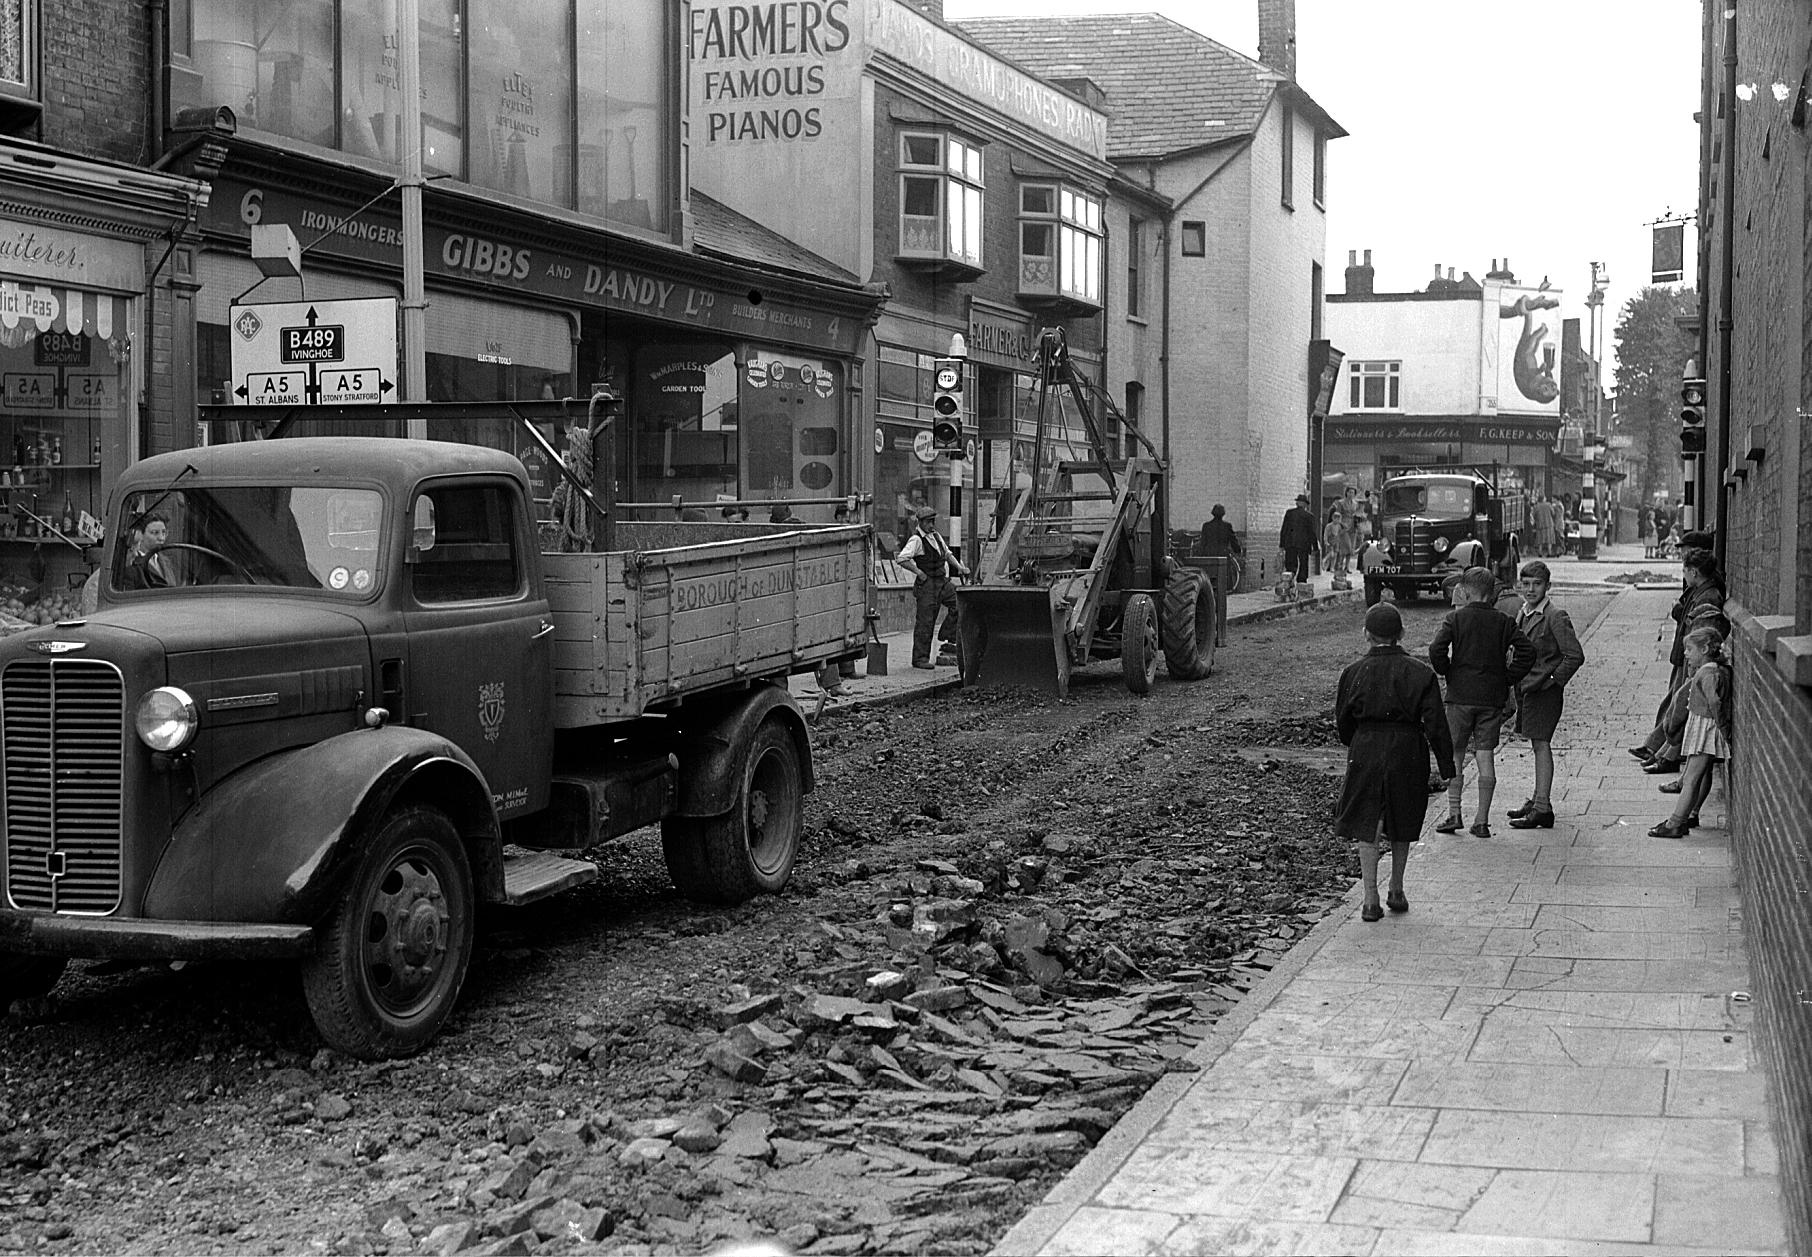 Farmer's music shop and Gibbs and Dandy are seen in the background of this photo of Church Street being resurfaced in 1952.